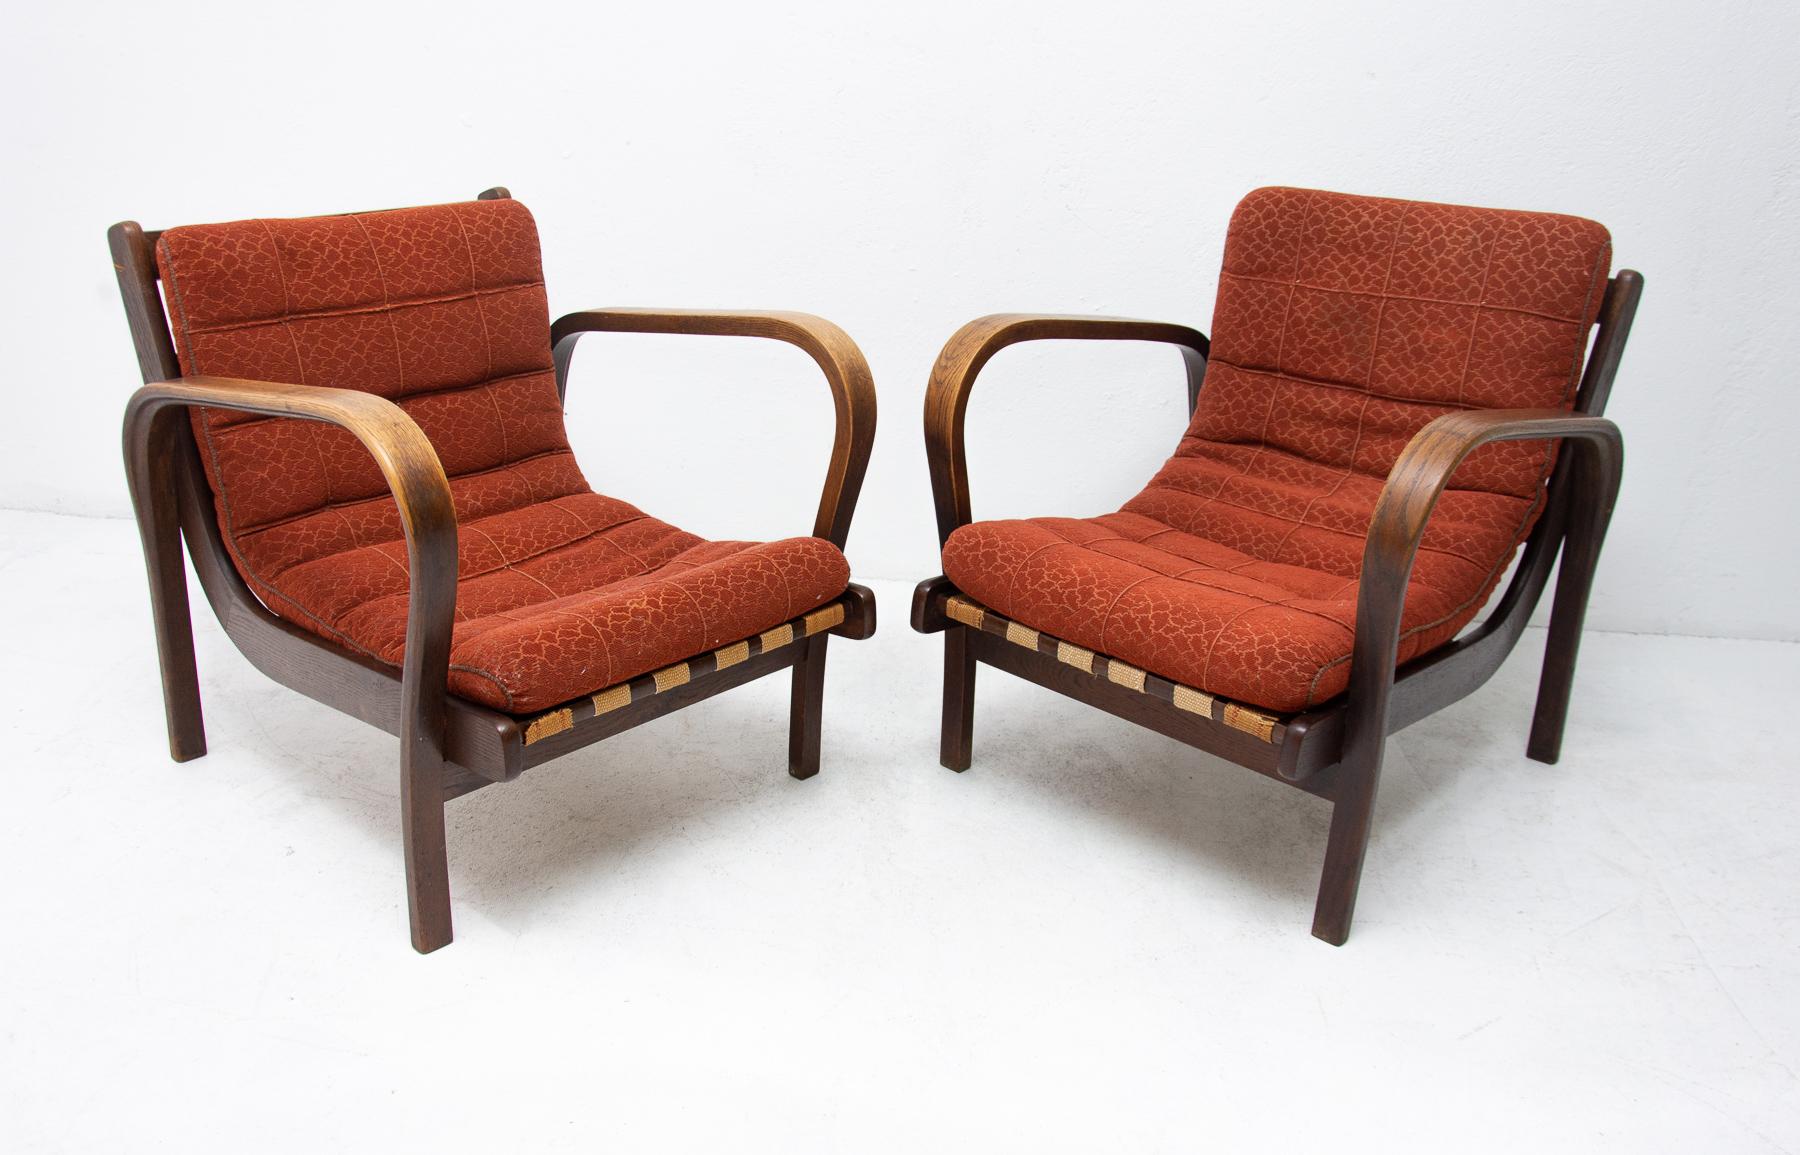 A pair of midcentury armchairs designed by Kropacek and Kozelka, manufactured in the former Czechoslovakia for Interior Praha. These armchairs received a silver medal at the 1946 Milan Triennale. The armchairs are in very good condition, feature a